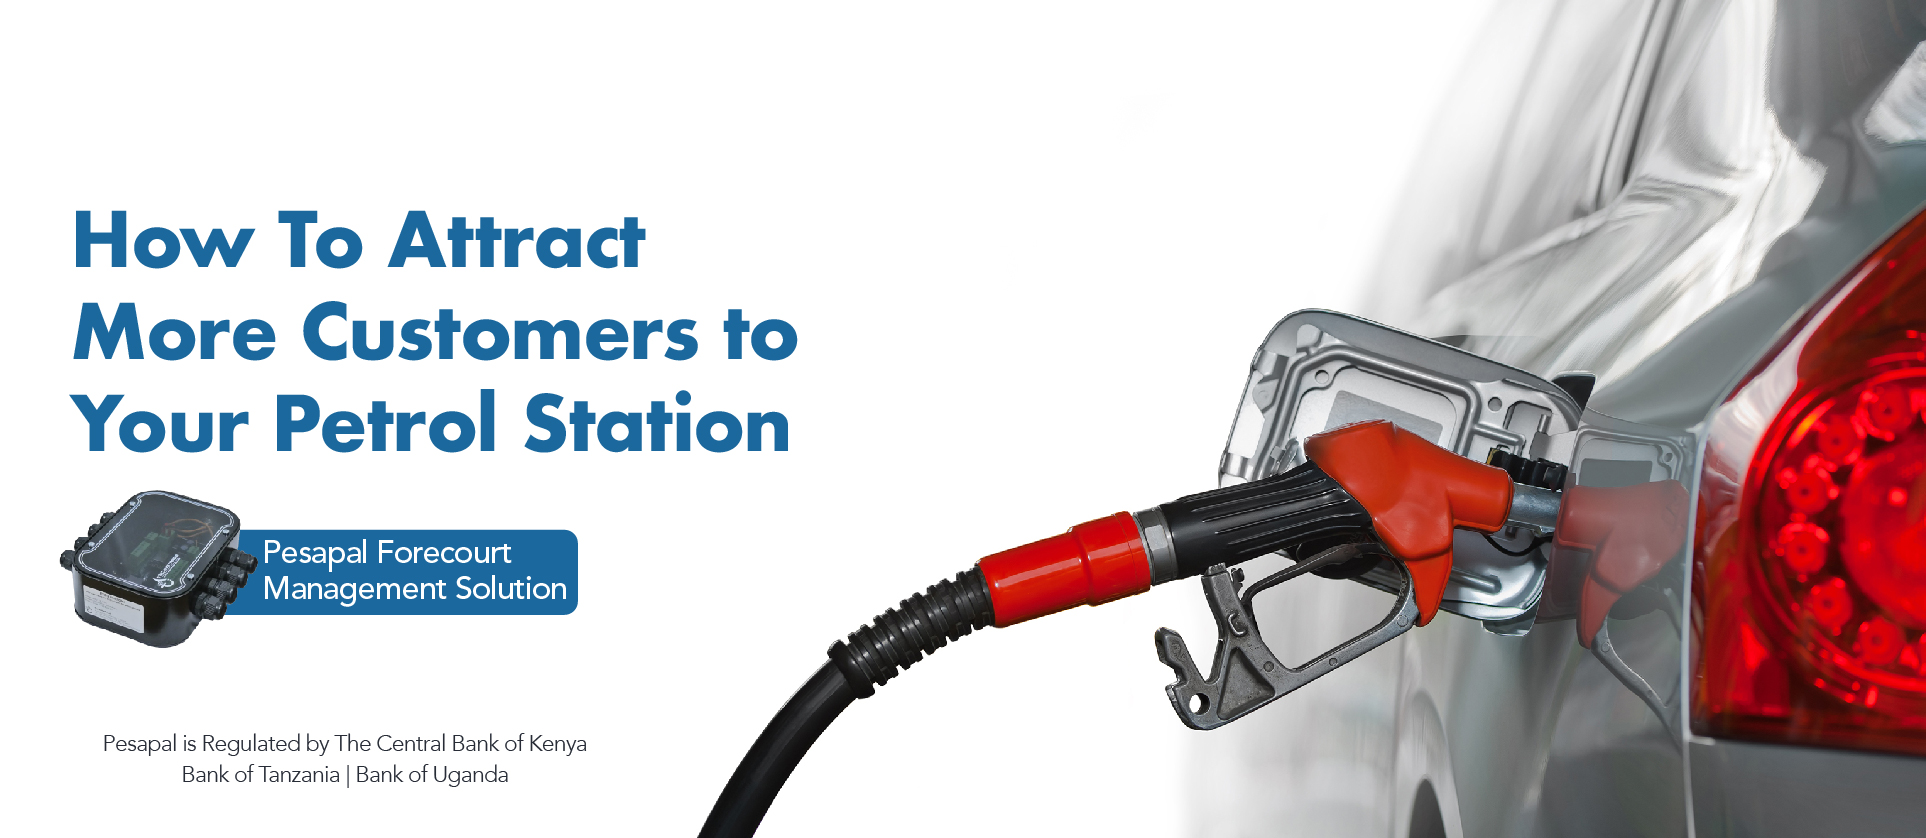 How To Attract More Customers To Your Petrol Station